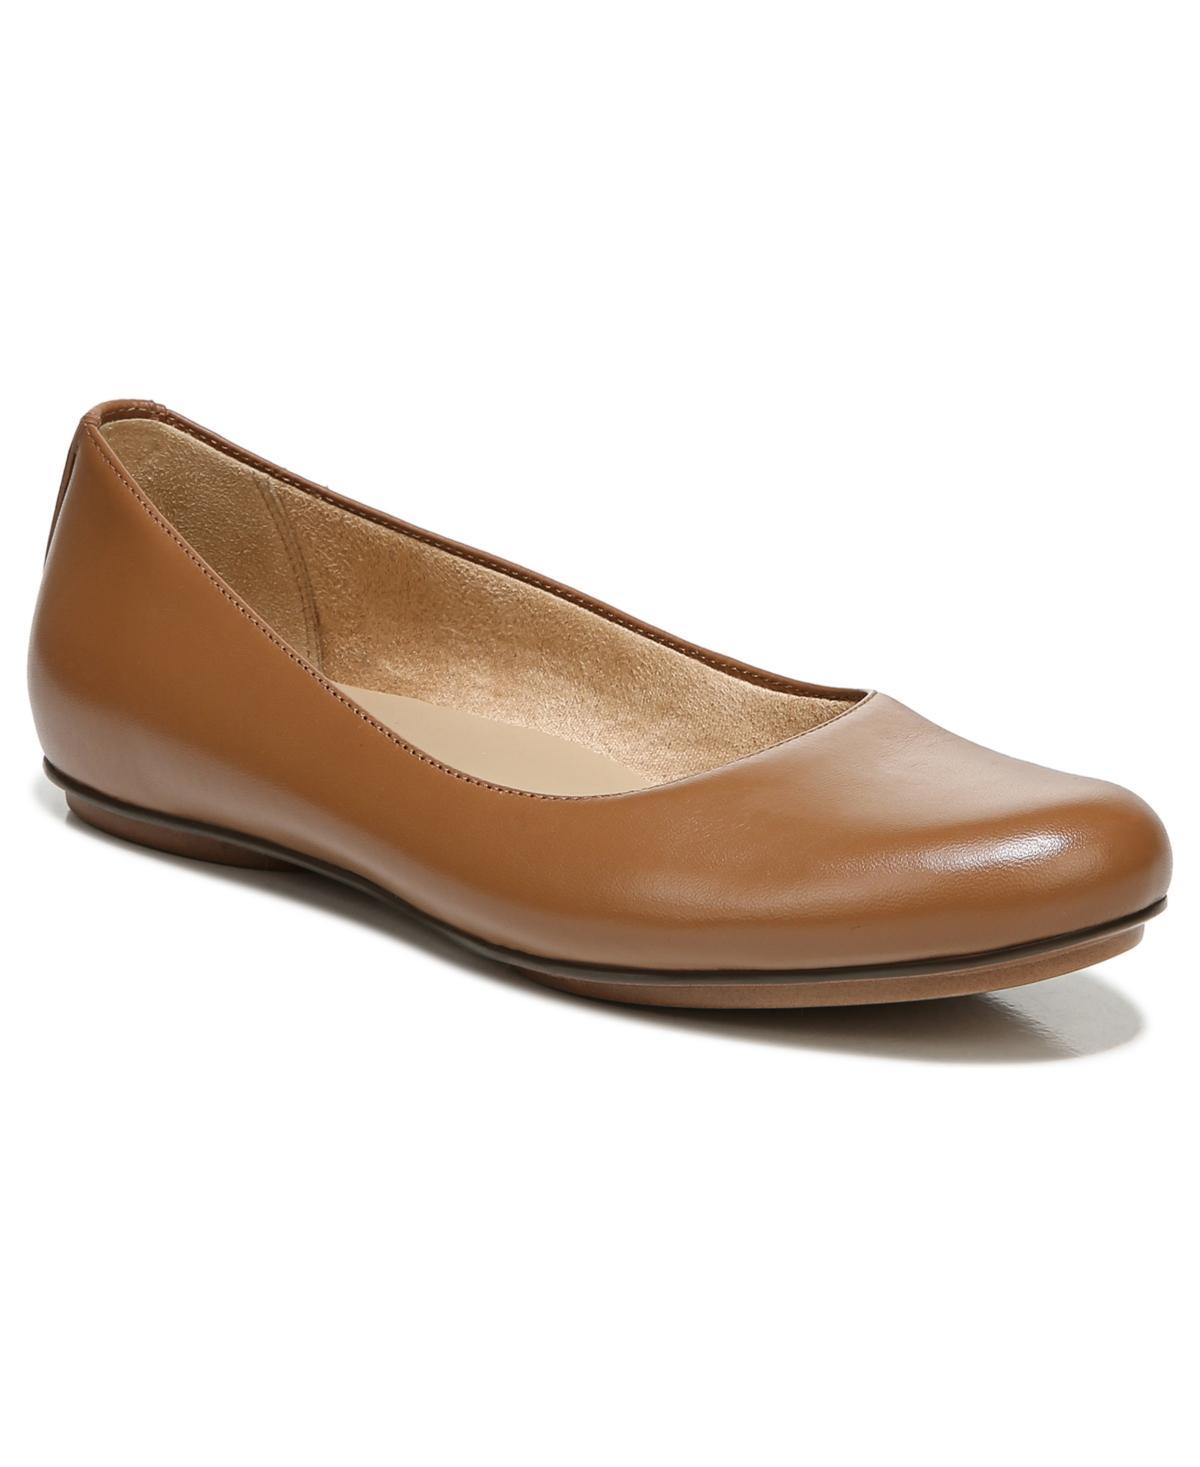 Naturalizer Maxwell (Barely Nude) Women's Shoes Product Image